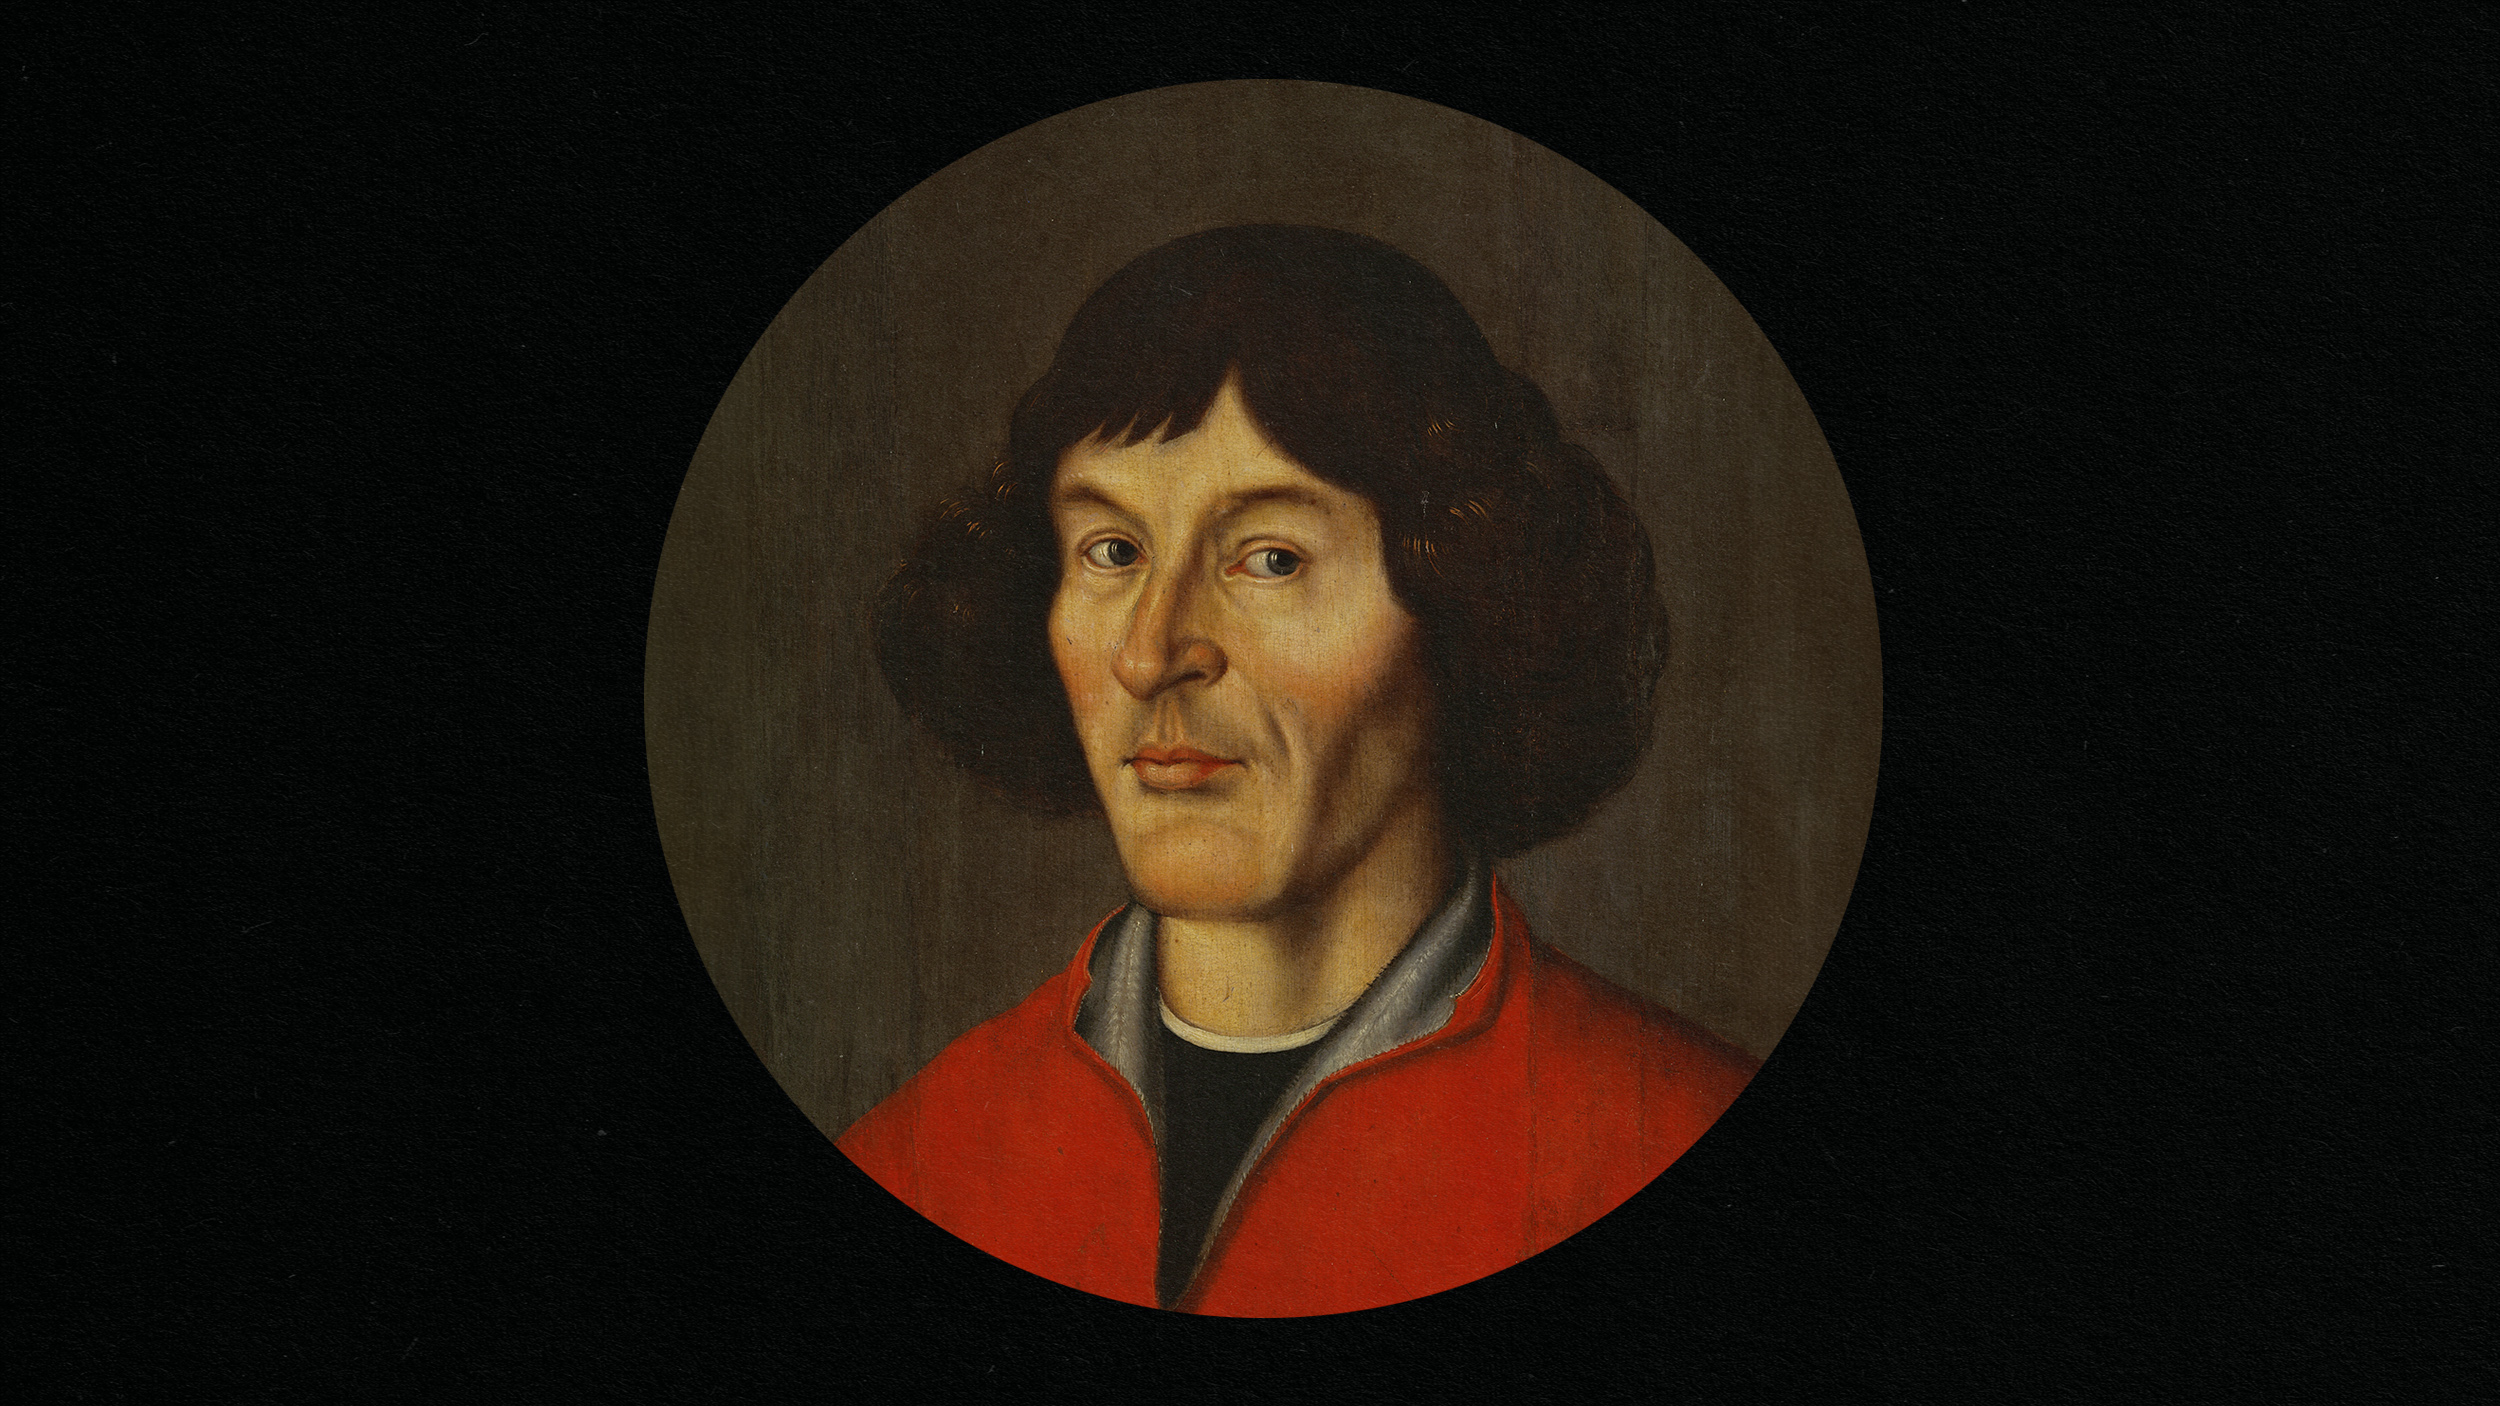 A portrait of a man in a red coat, hinting at Copernicanism through symbolism.